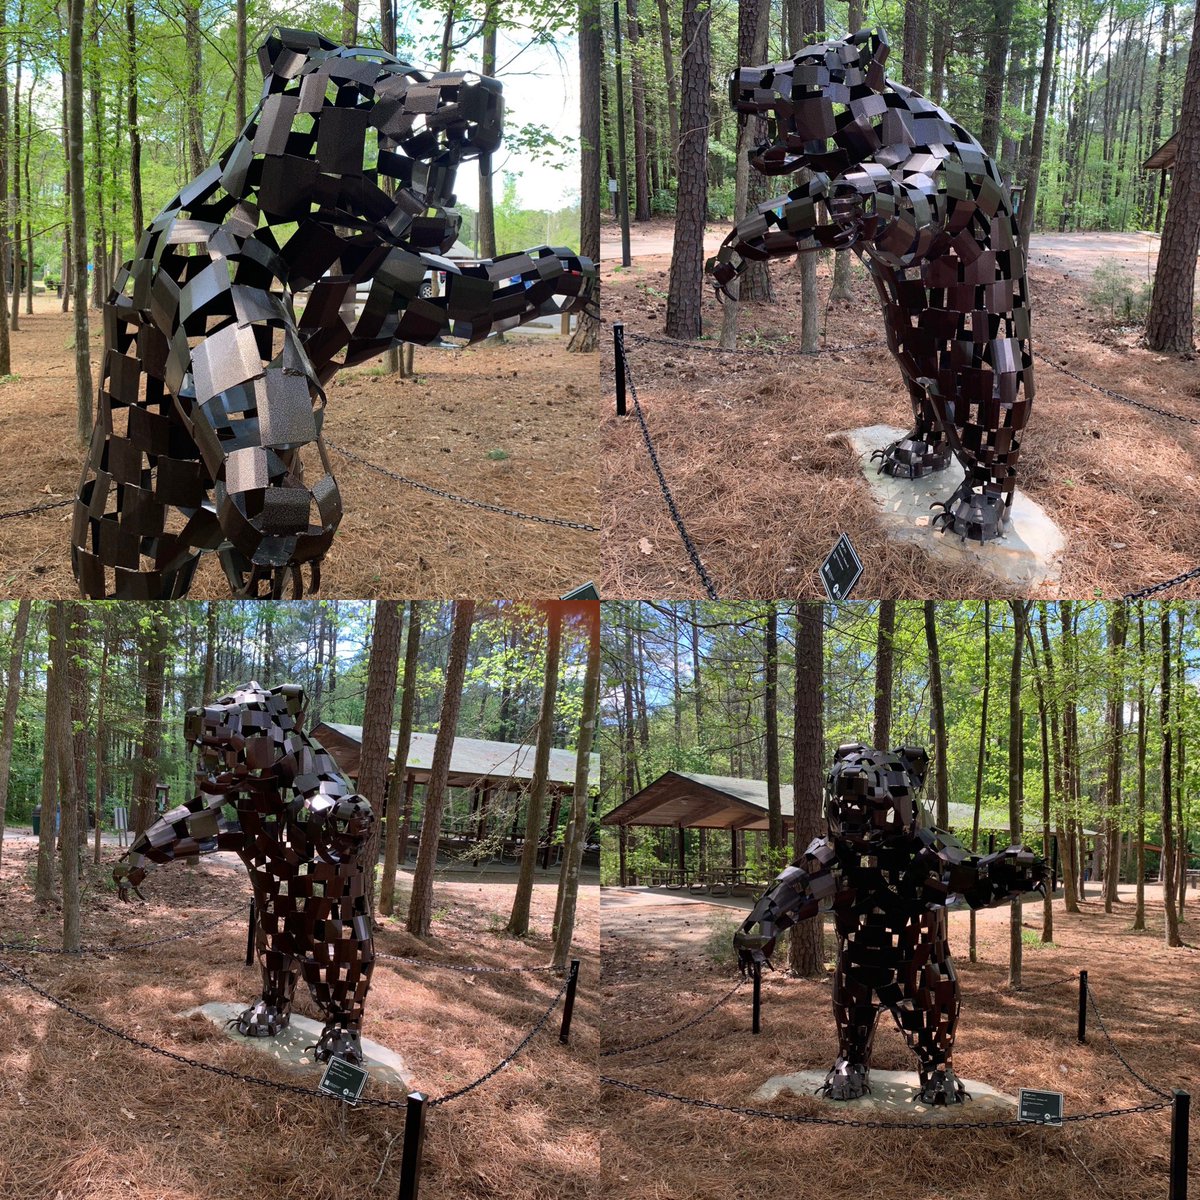 Jager has found a forever home at the Apex Community Park!  It is a phenomenal park for outdoor enthusiasts and a big thank you to the Town of Apex for the purchase and support!  #tjcdurham #townofapex #artforall #animalawareness #sculpture #endangeredspecies #ncartist #durhamnc